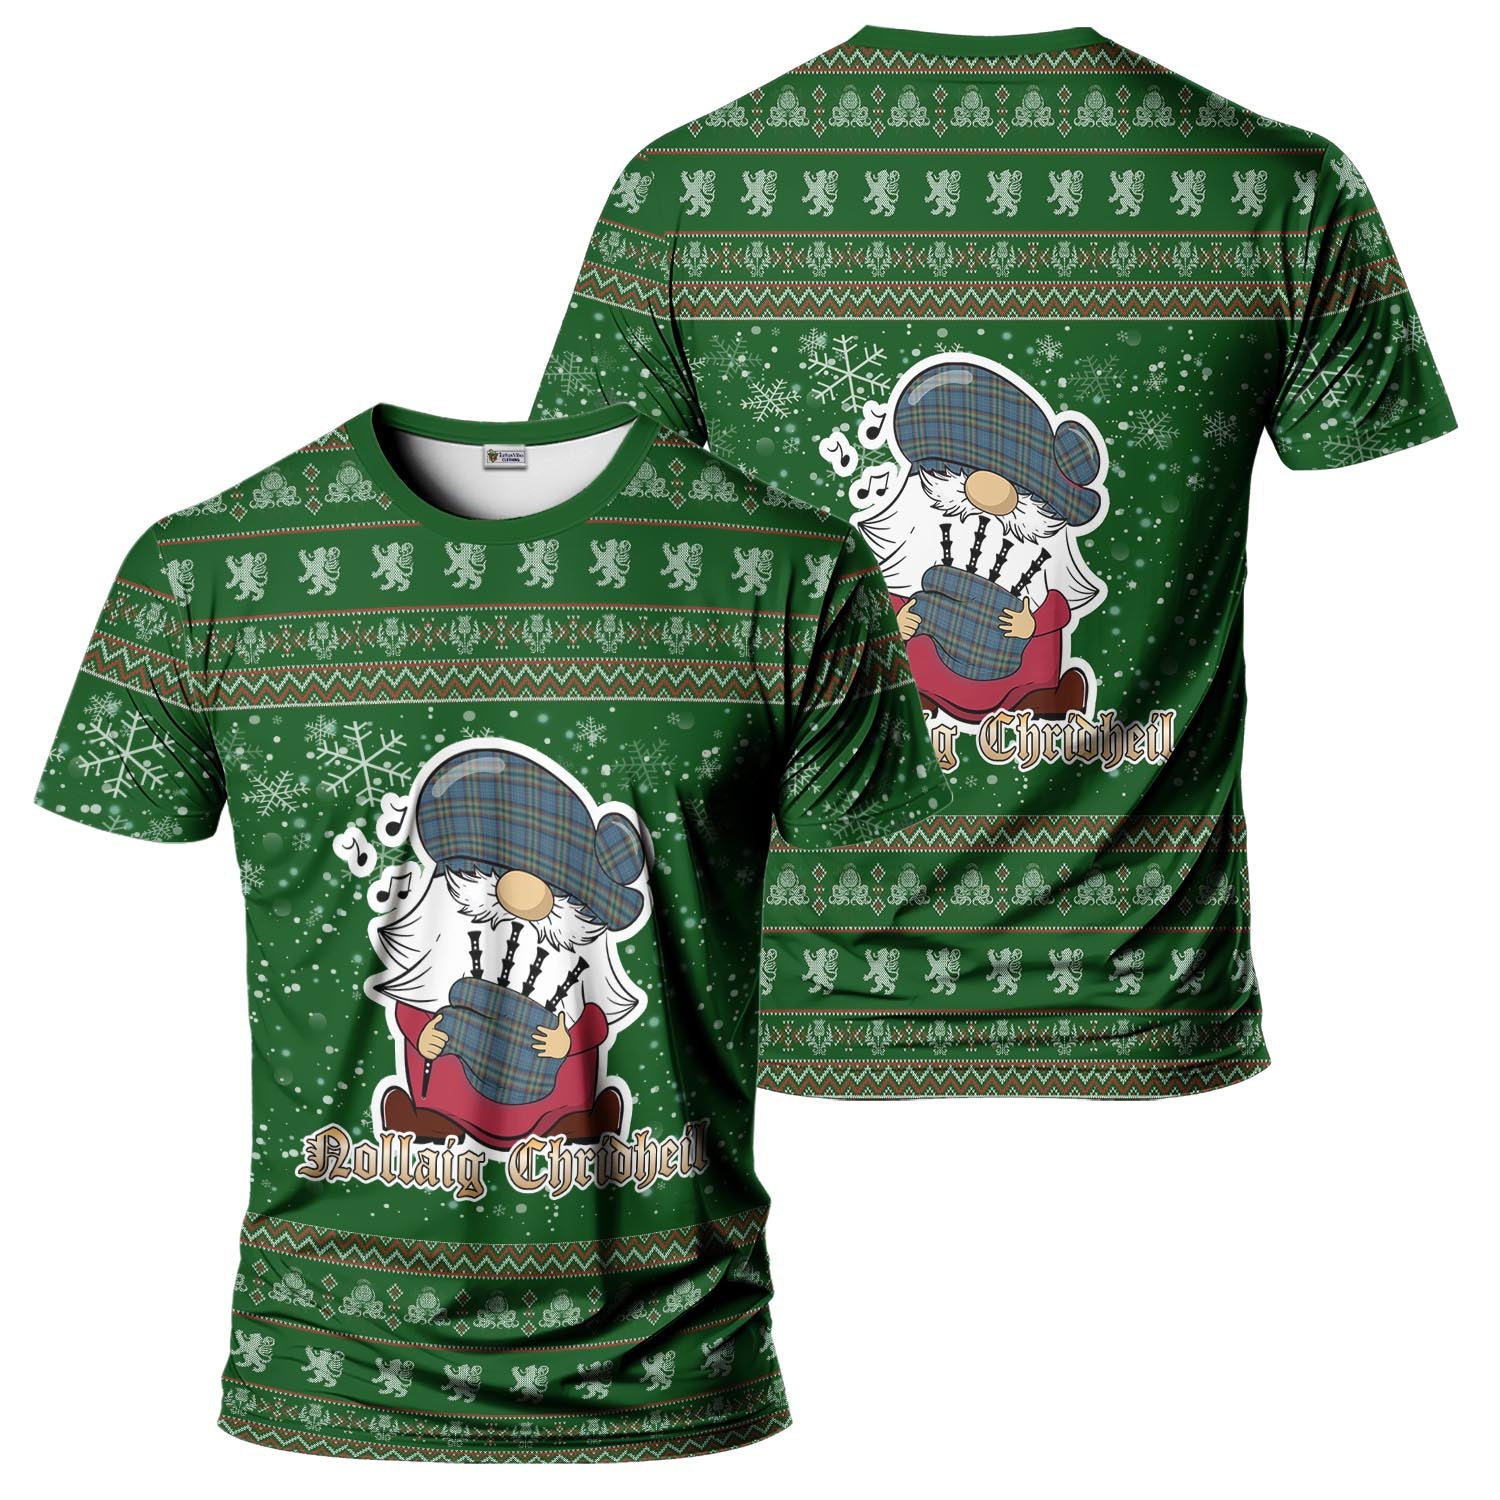 Ralston UK Clan Christmas Family T-Shirt with Funny Gnome Playing Bagpipes Men's Shirt Green - Tartanvibesclothing